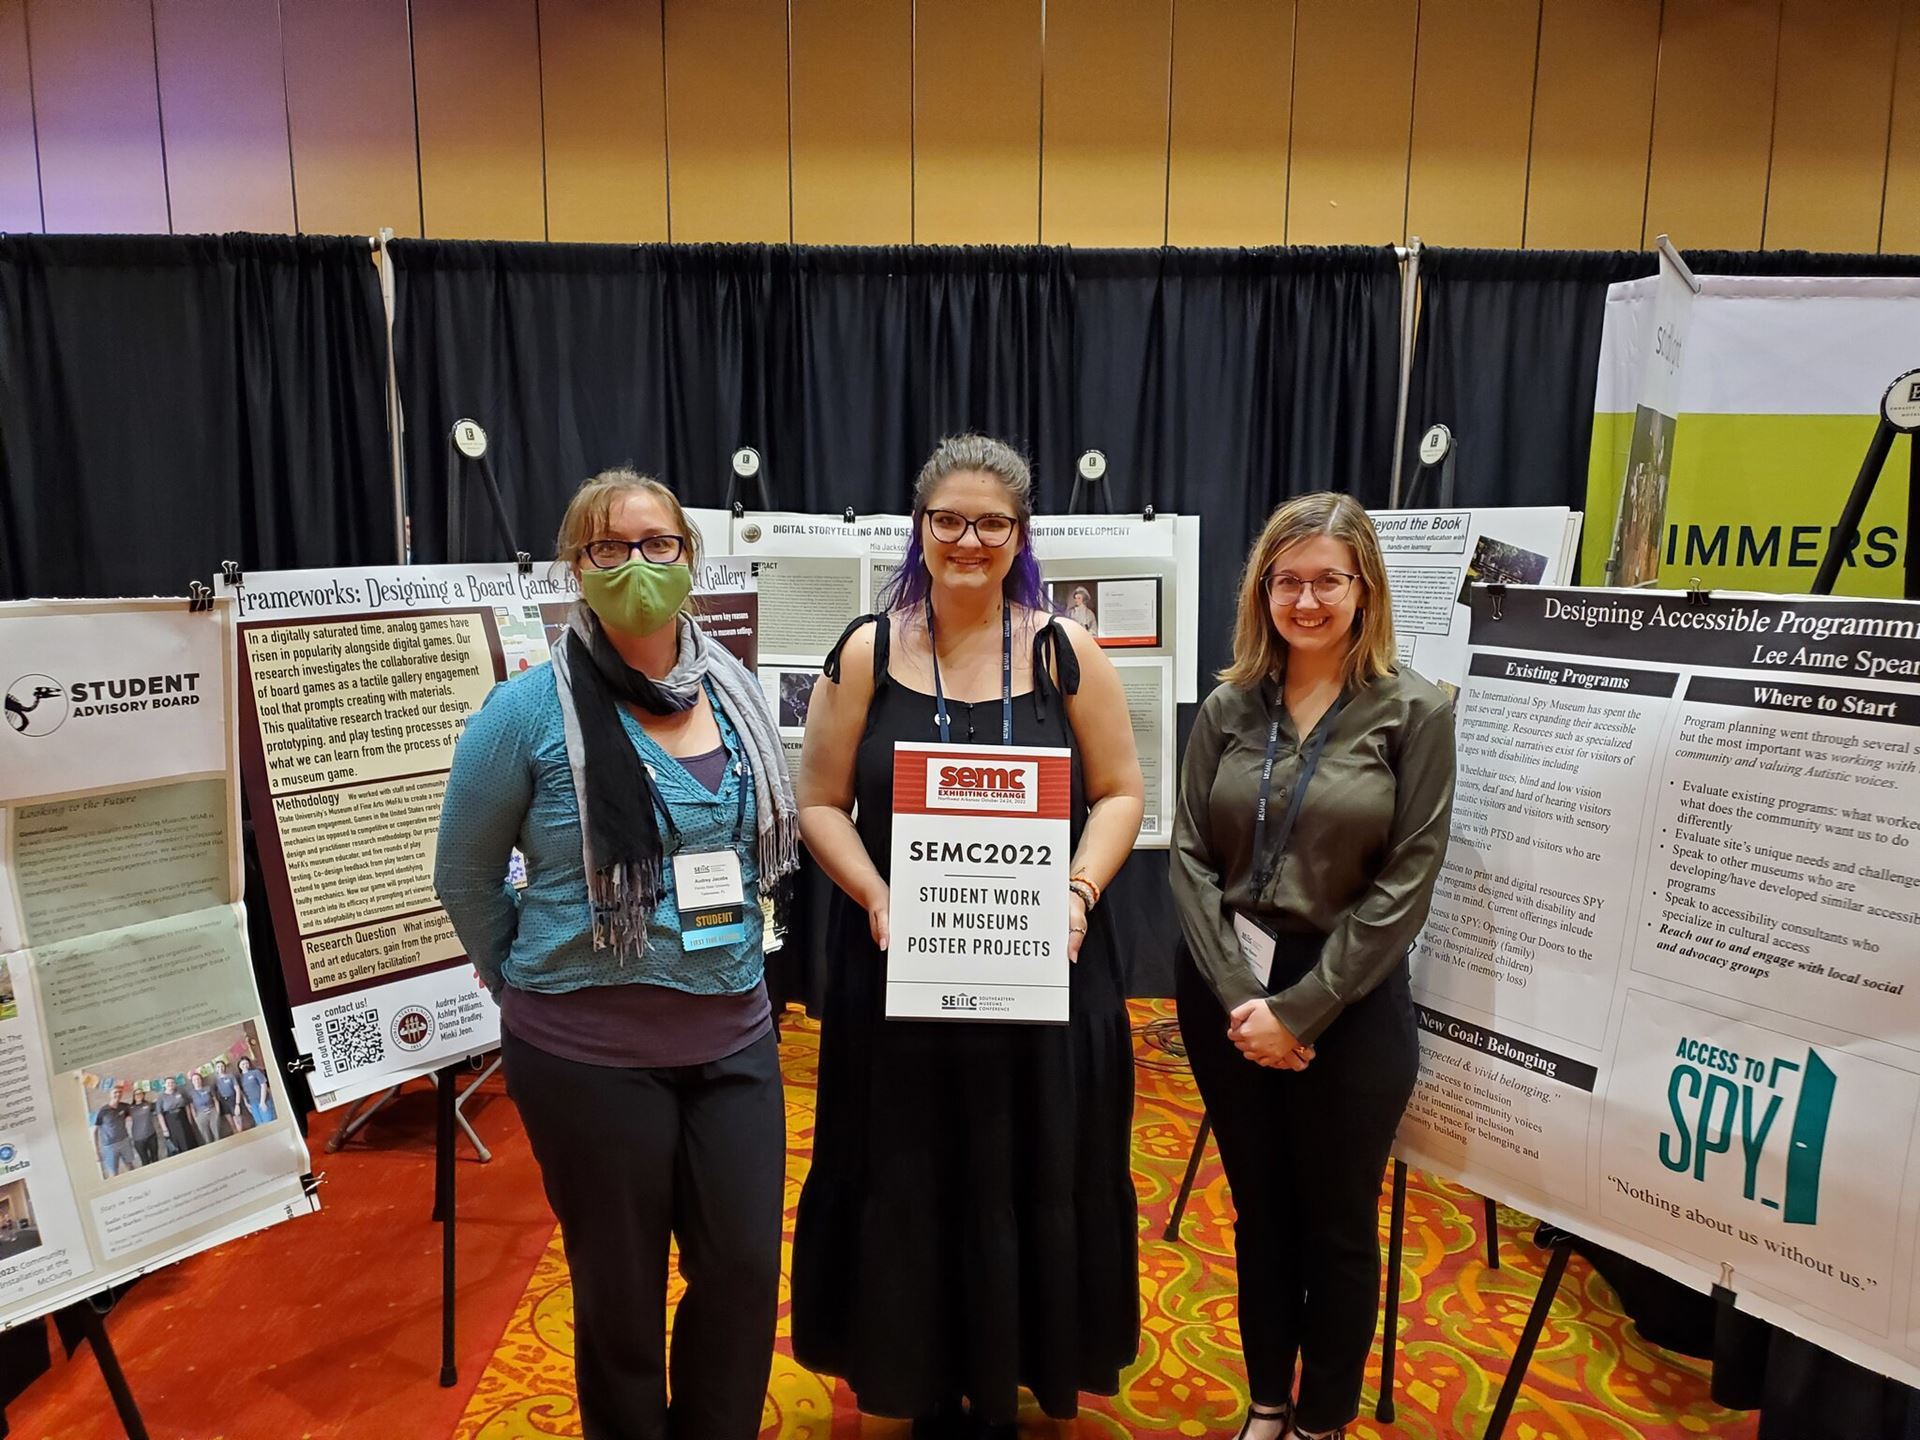 Three women stand centered in the picture, all smiling at the camera. Surrounding them are many poster presentations. The woman in the middle holds a sign that says "SEMC2022: Student Works in Museums Poster Projects"